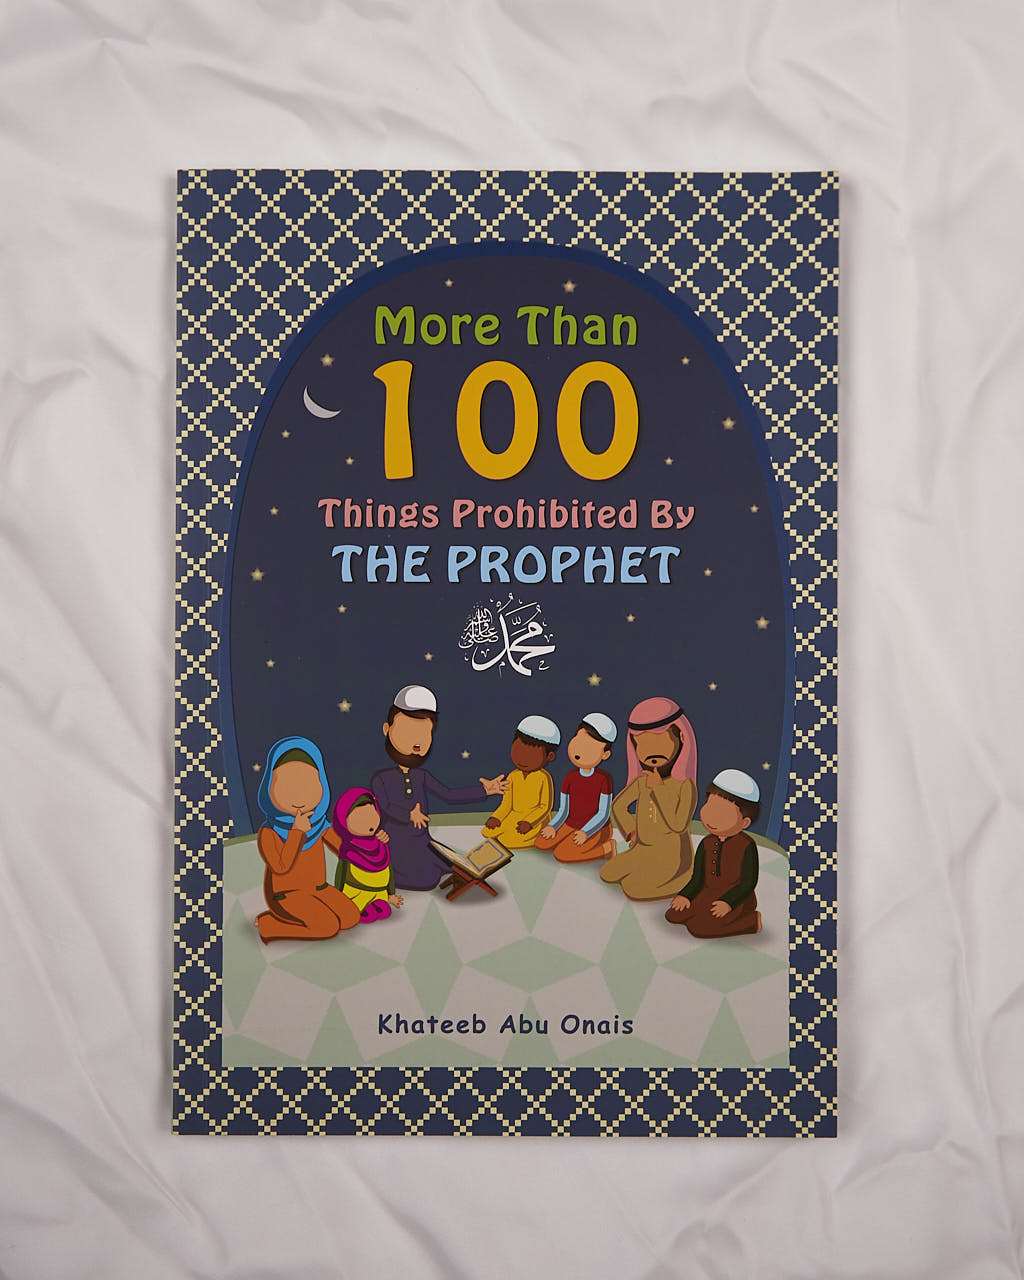 More Than 100 Things Prohibited by the Prophet - Islamic Book - Fajr Noor